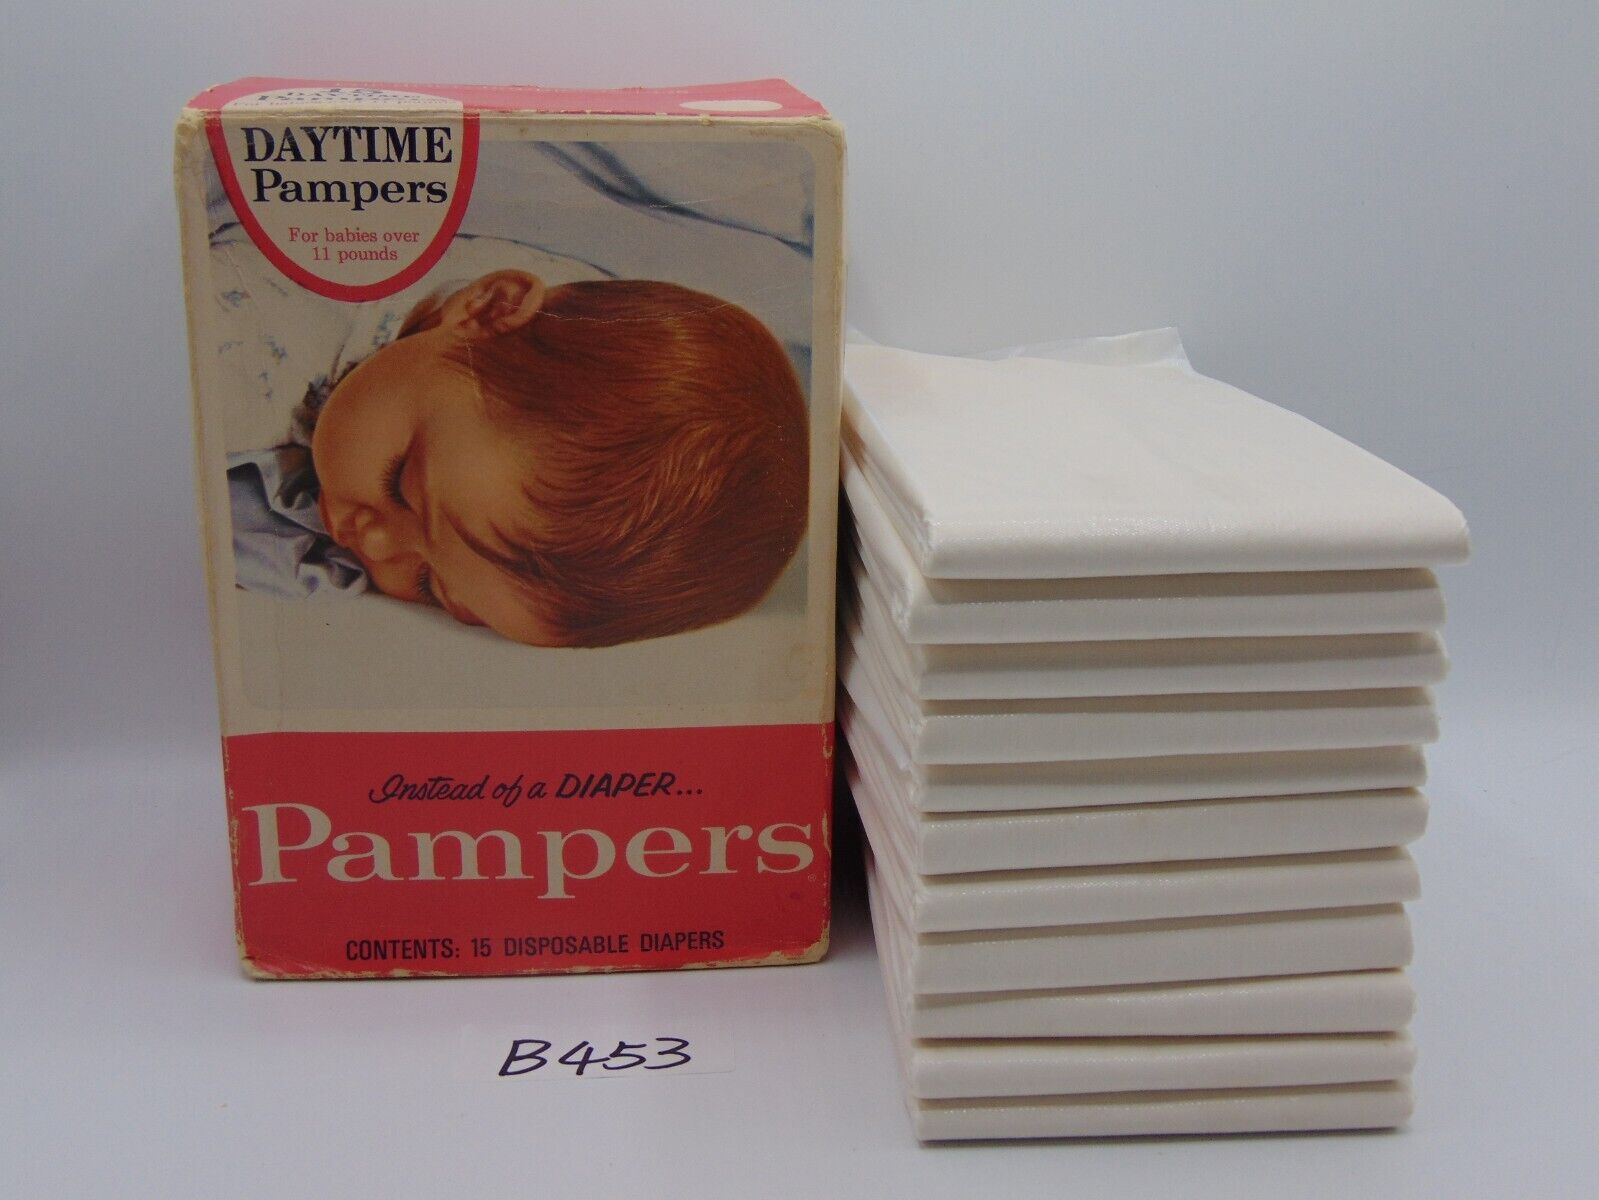 Vintage 1960s Pampers Collectible Daytime Diapers 11 ct New in Box Over 11 lbs